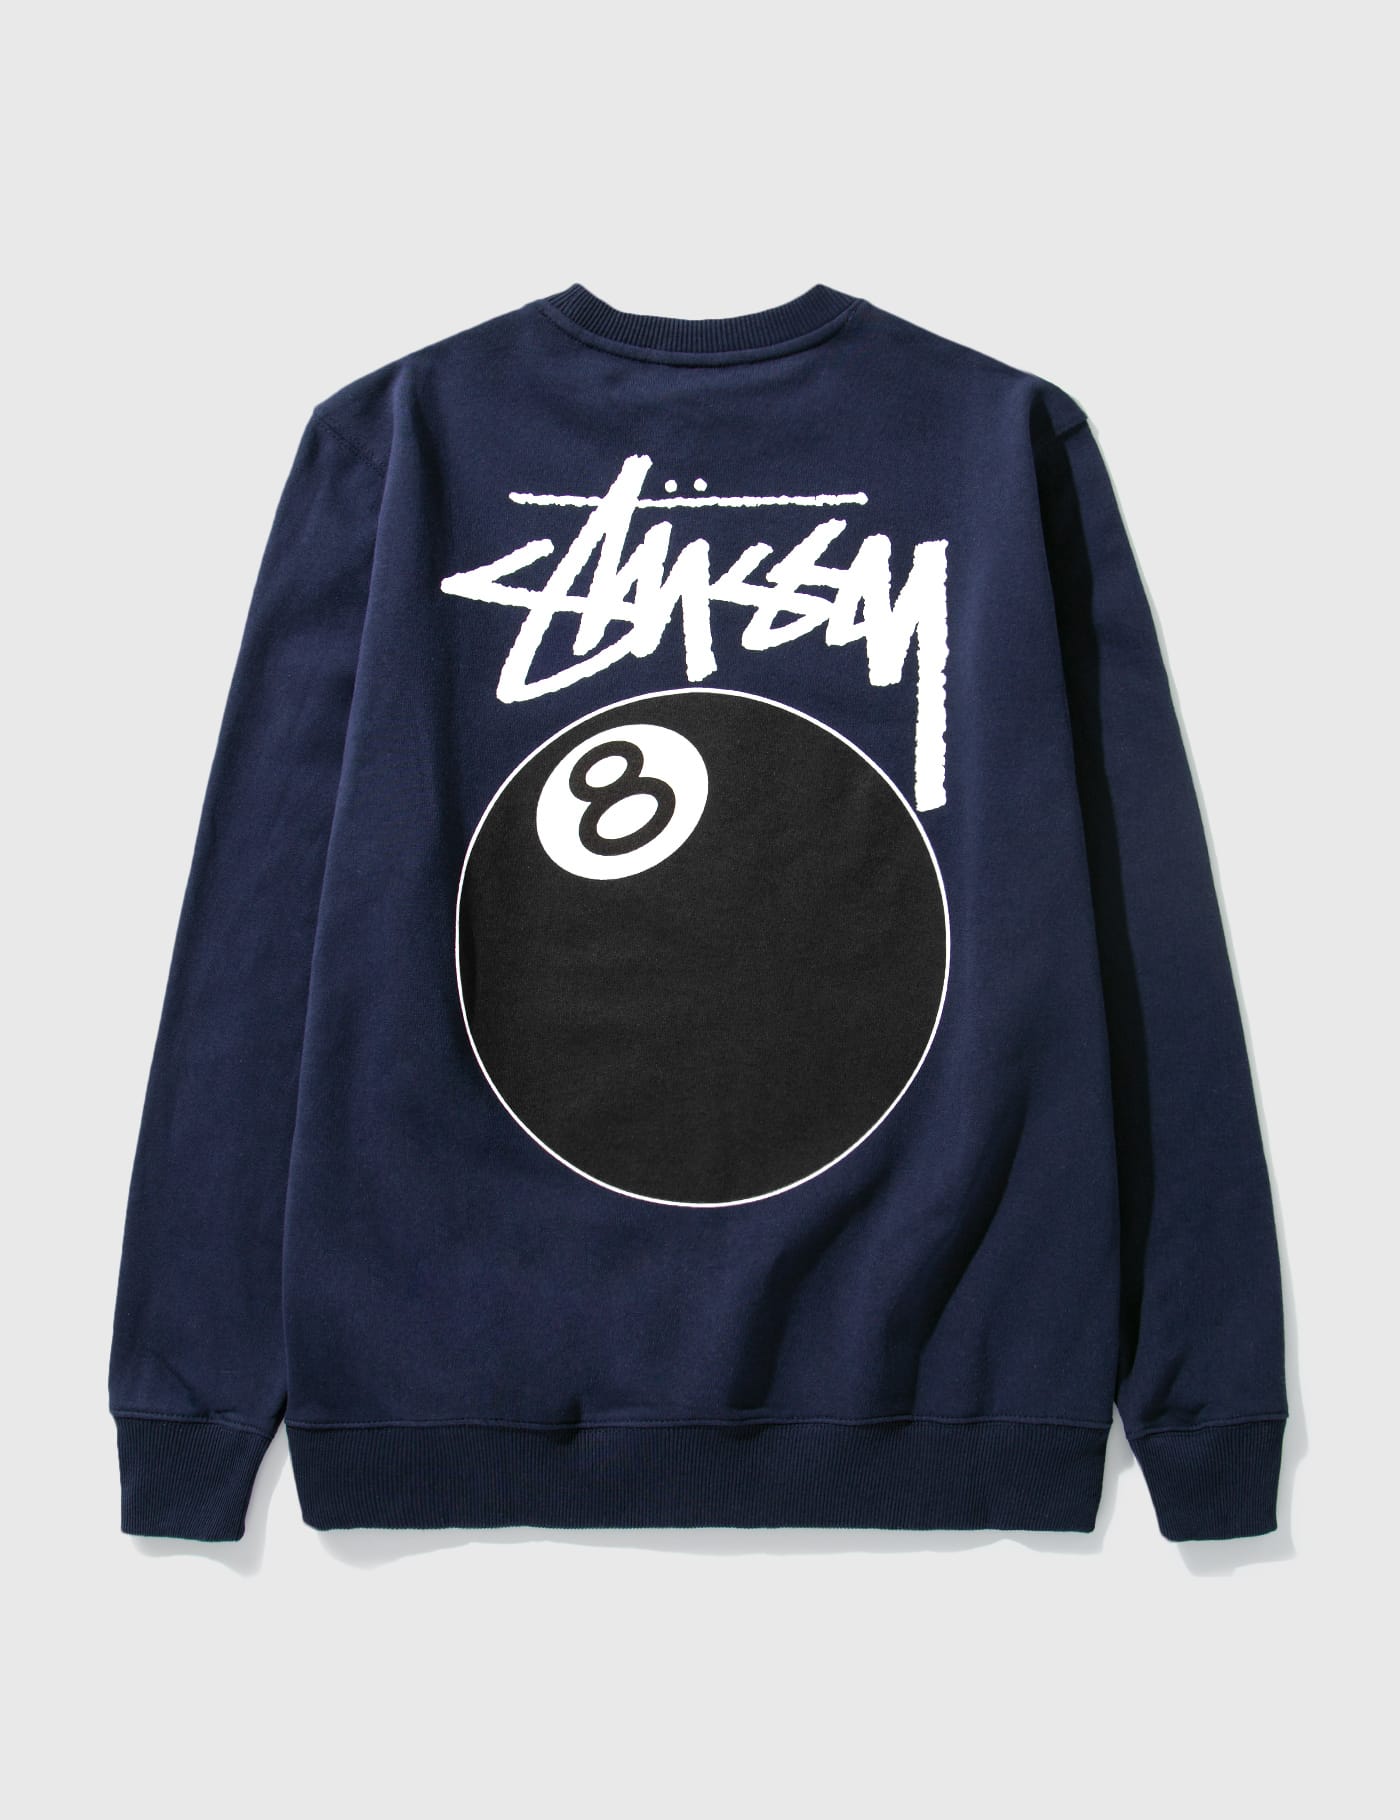 Stüssy - 8 Ball Crew | HBX - Globally Curated Fashion and 